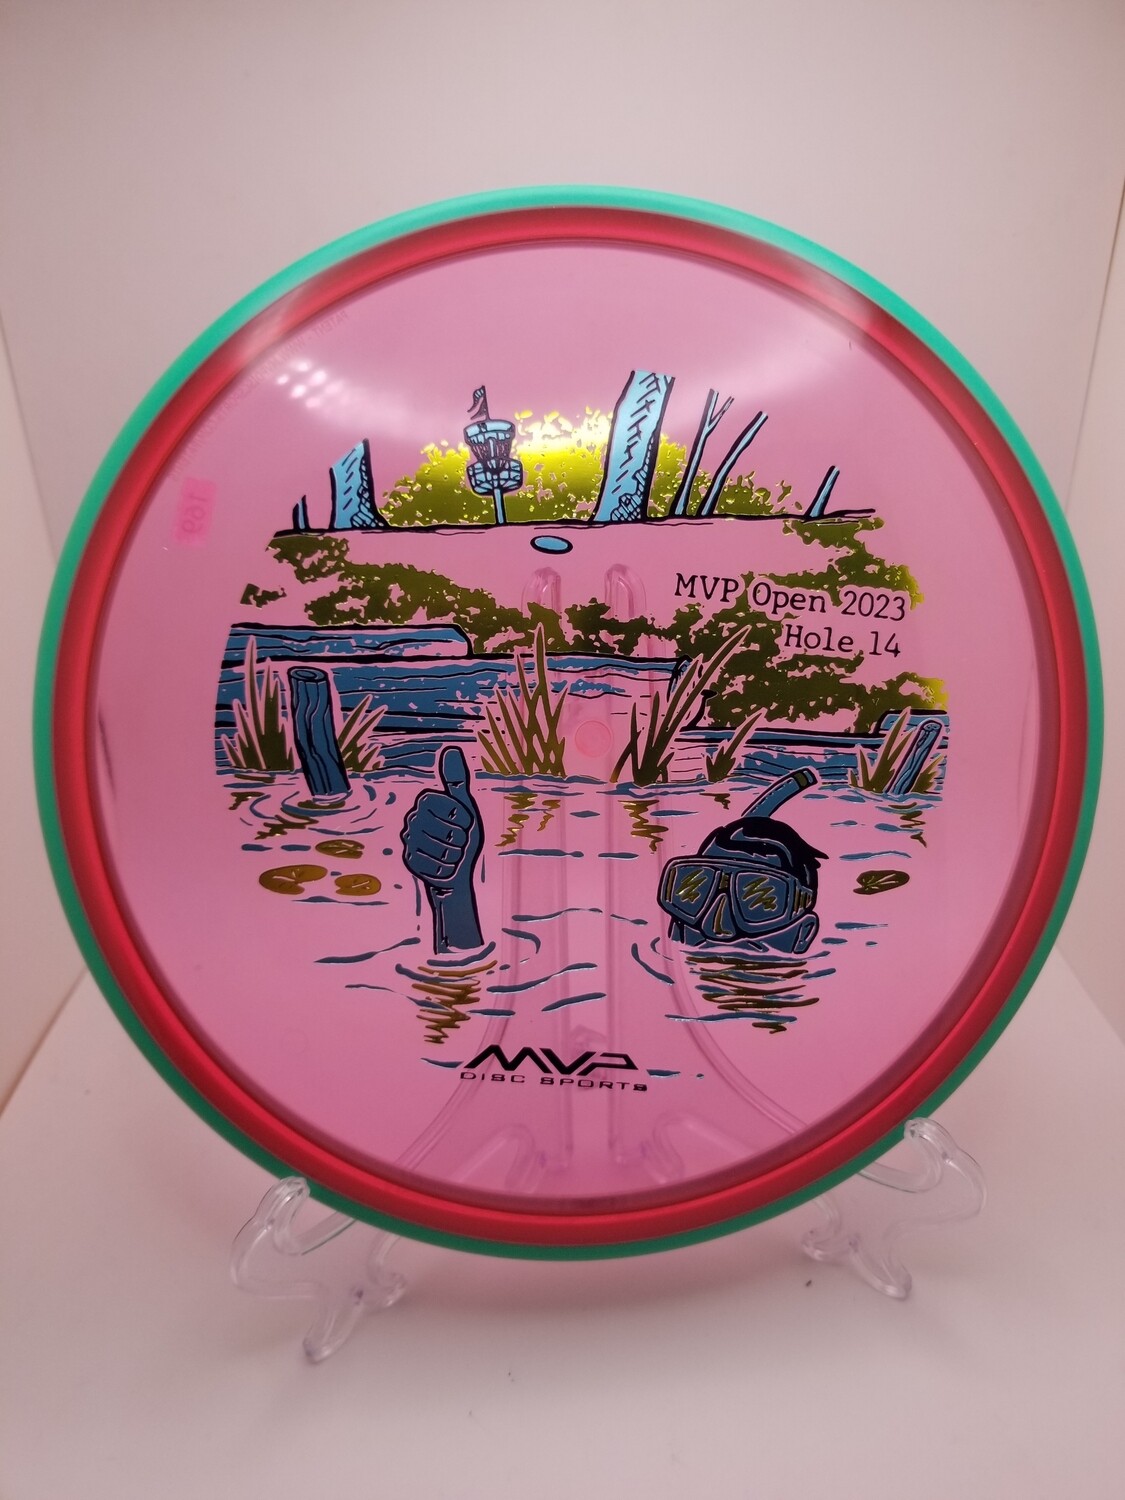 MVP Open Proton Soft Envy – Hole 14 Maple Hill Red Plate / Green Rim 169g